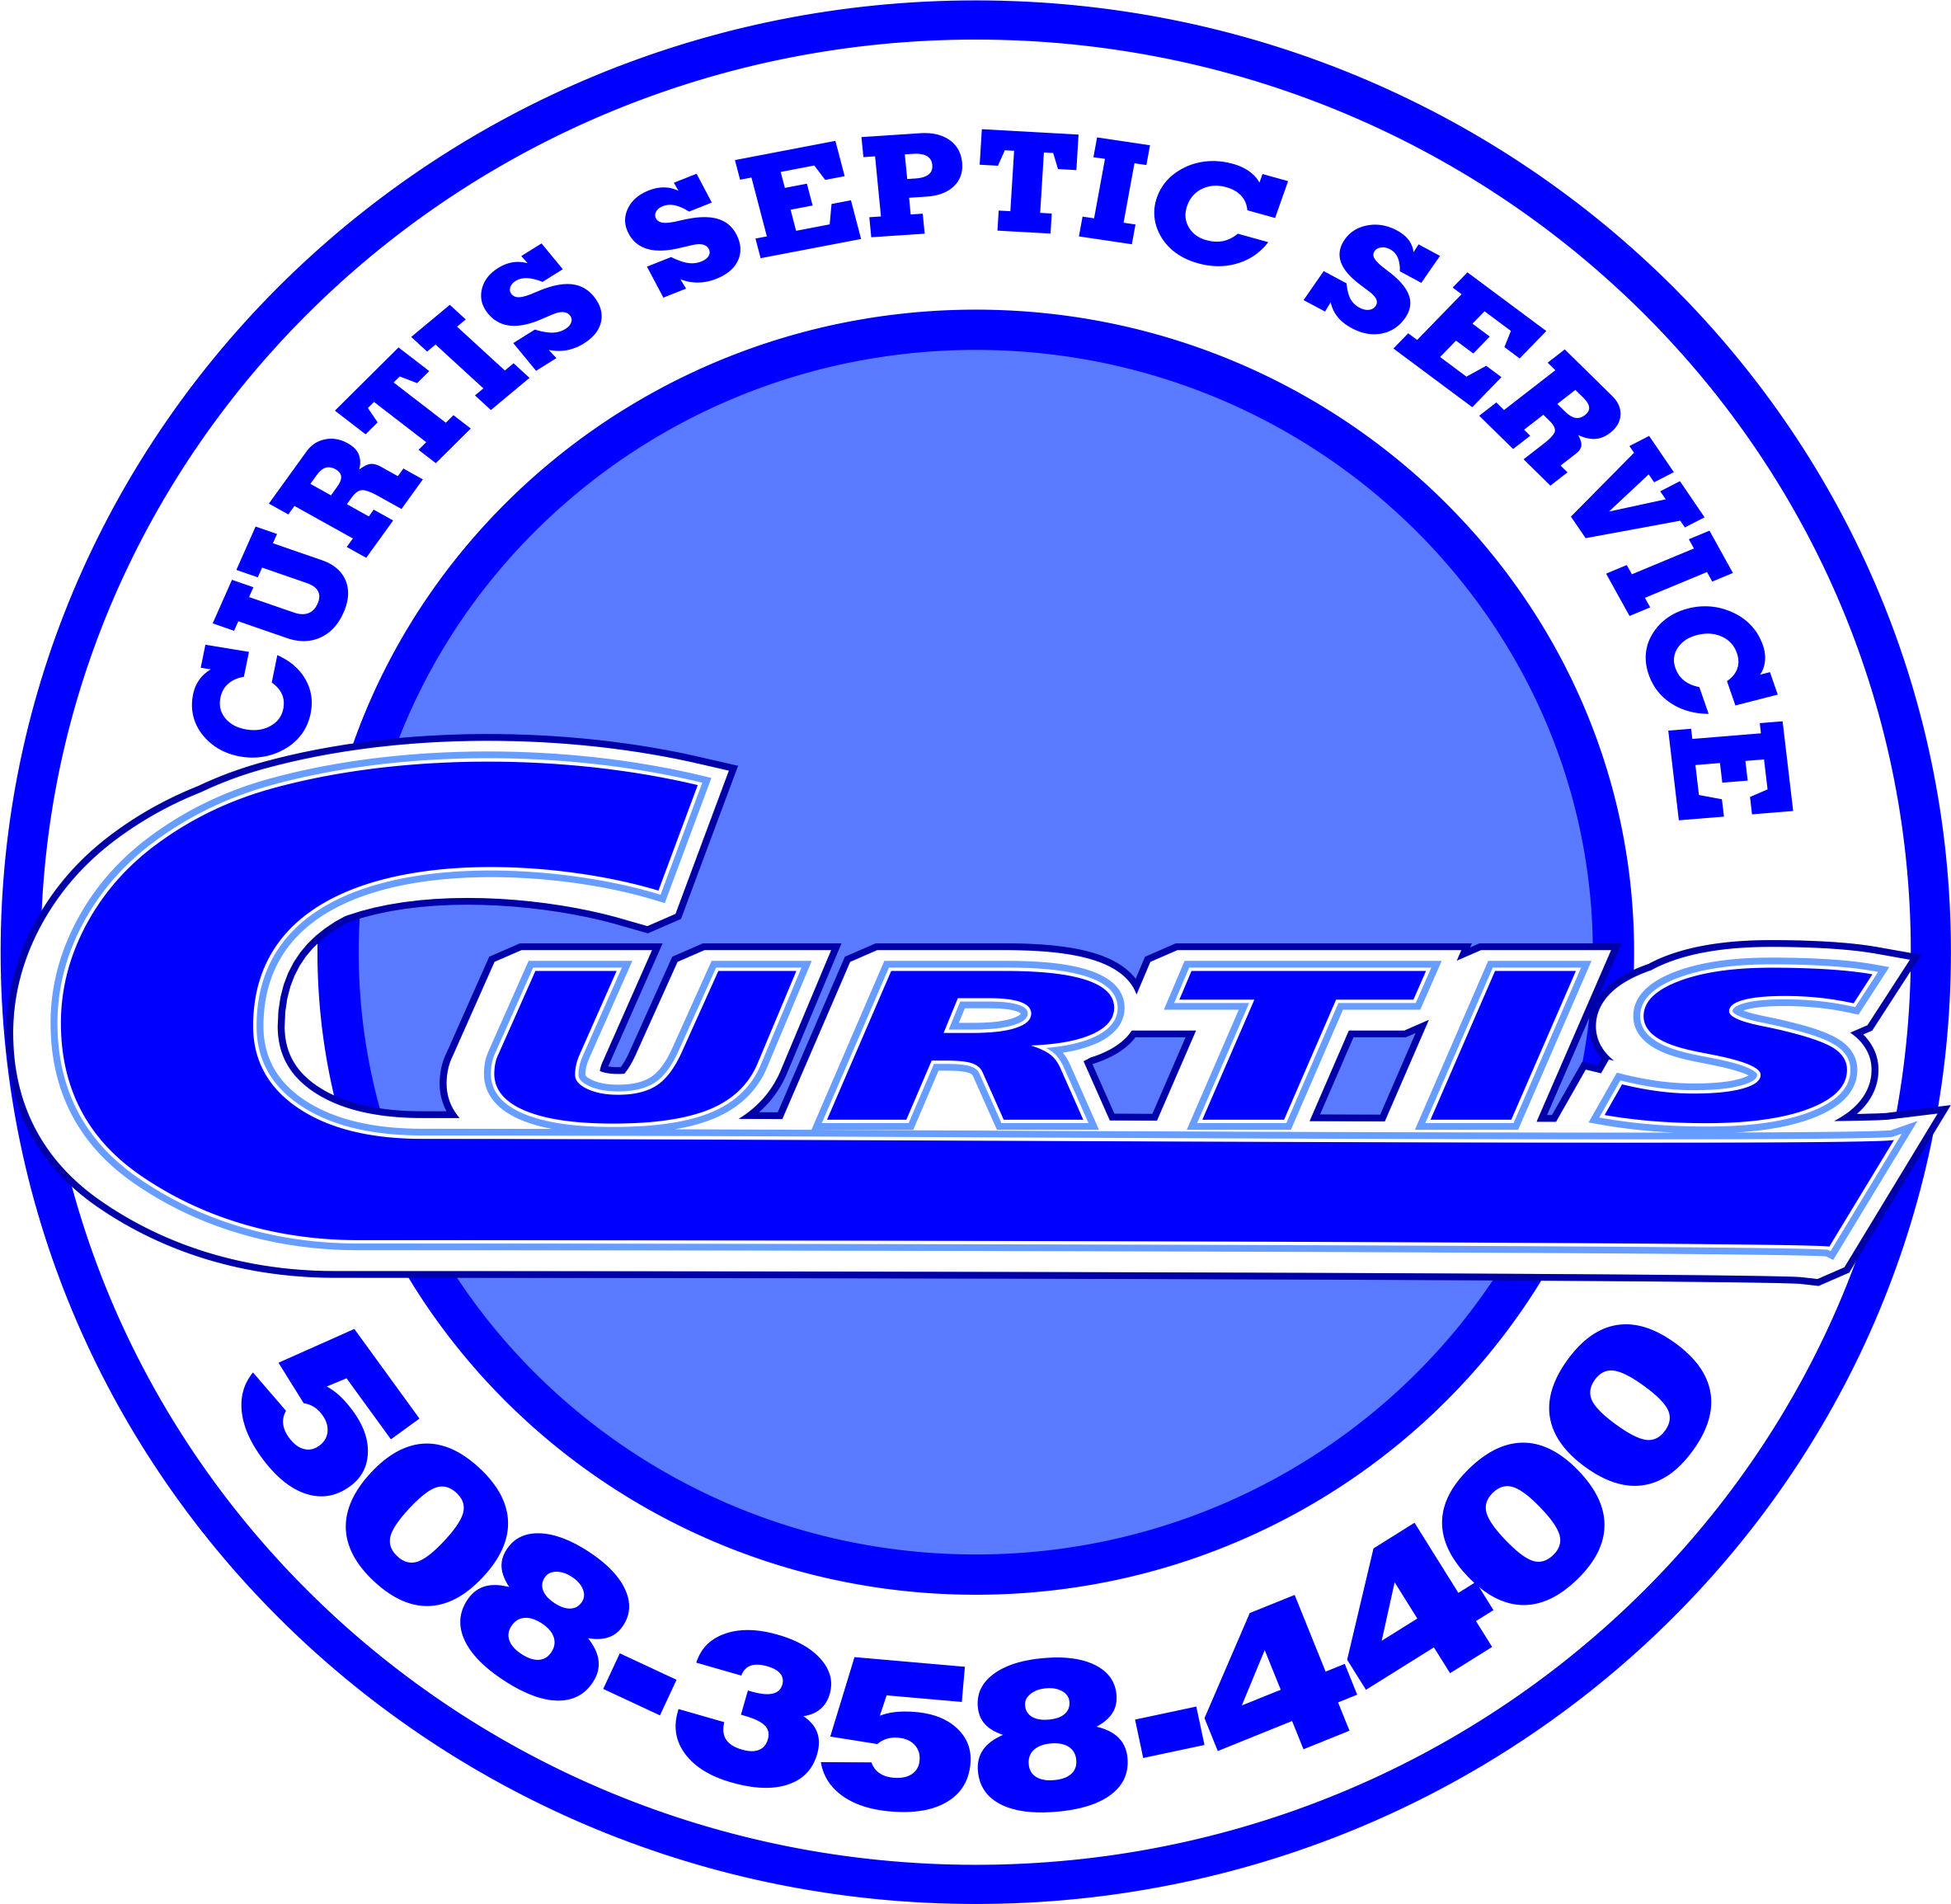 Septic system inspectors in Sterling, MA.